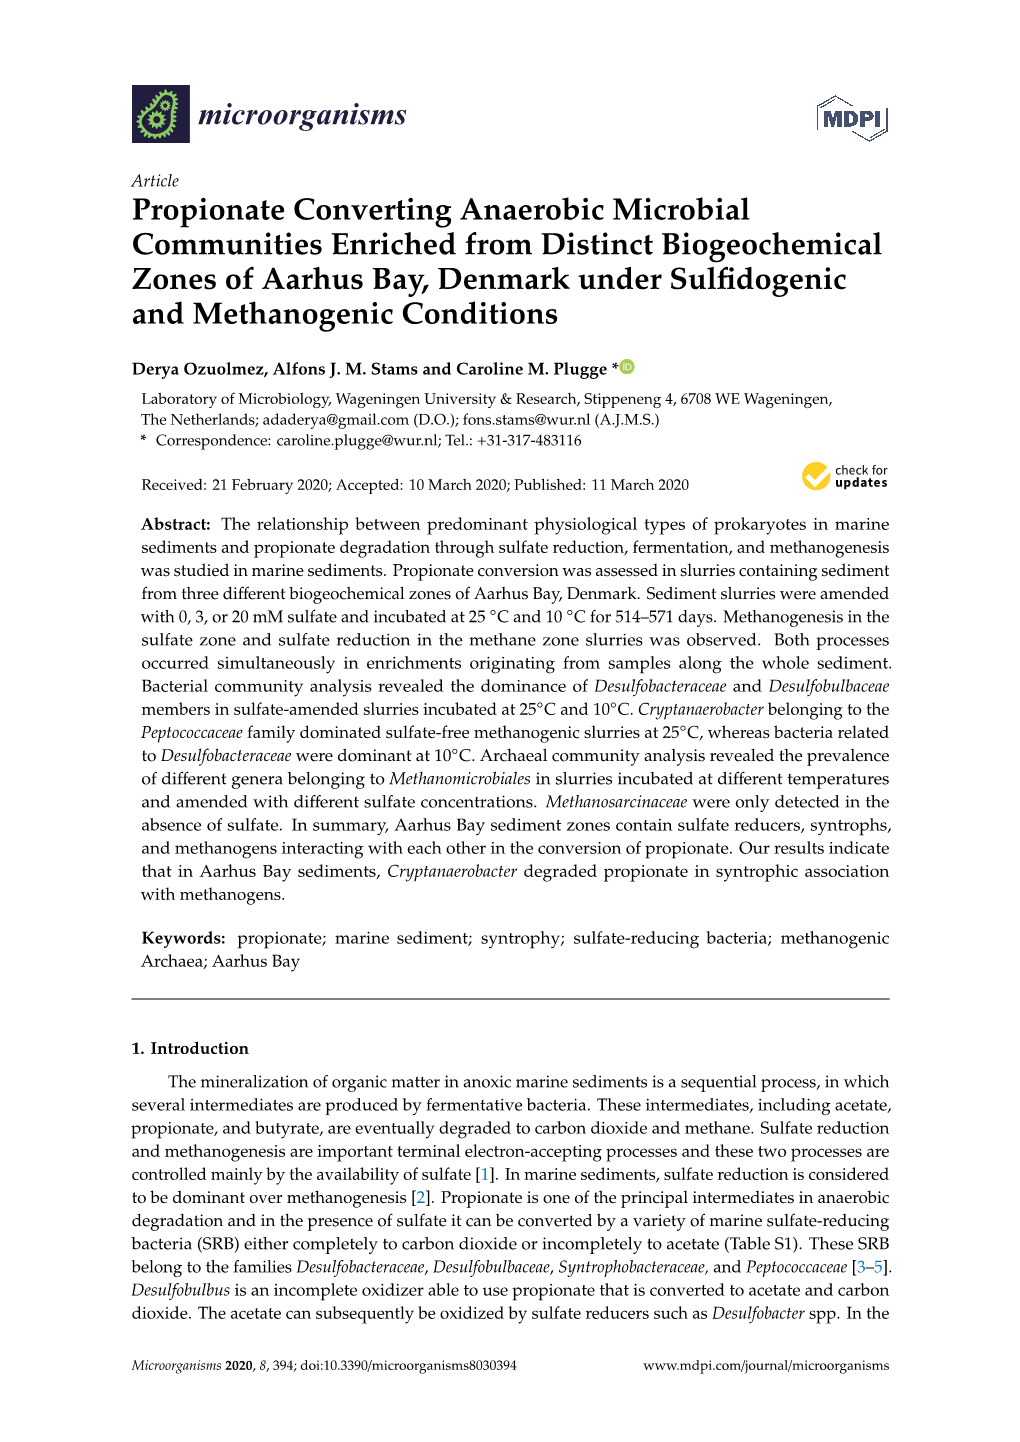 Propionate Converting Anaerobic Microbial Communities Enriched from Distinct Biogeochemical Zones of Aarhus Bay, Denmark Under Sulﬁdogenic and Methanogenic Conditions